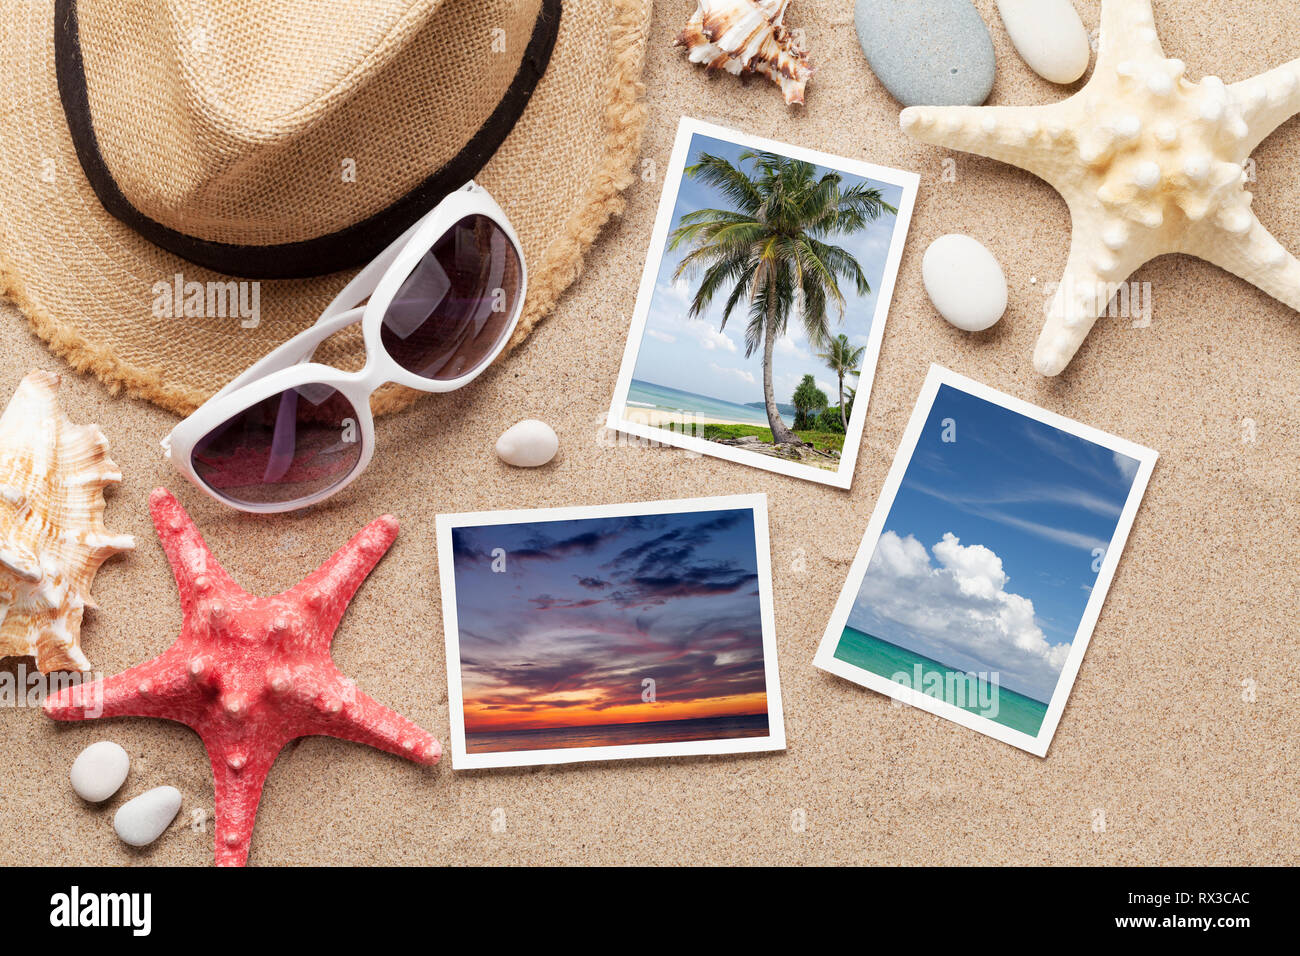 Travel vacation concept with hat, sunglasses, seashells and photos on sand backdrop. Top view. Flat lay. All photos taken by me Stock Photo